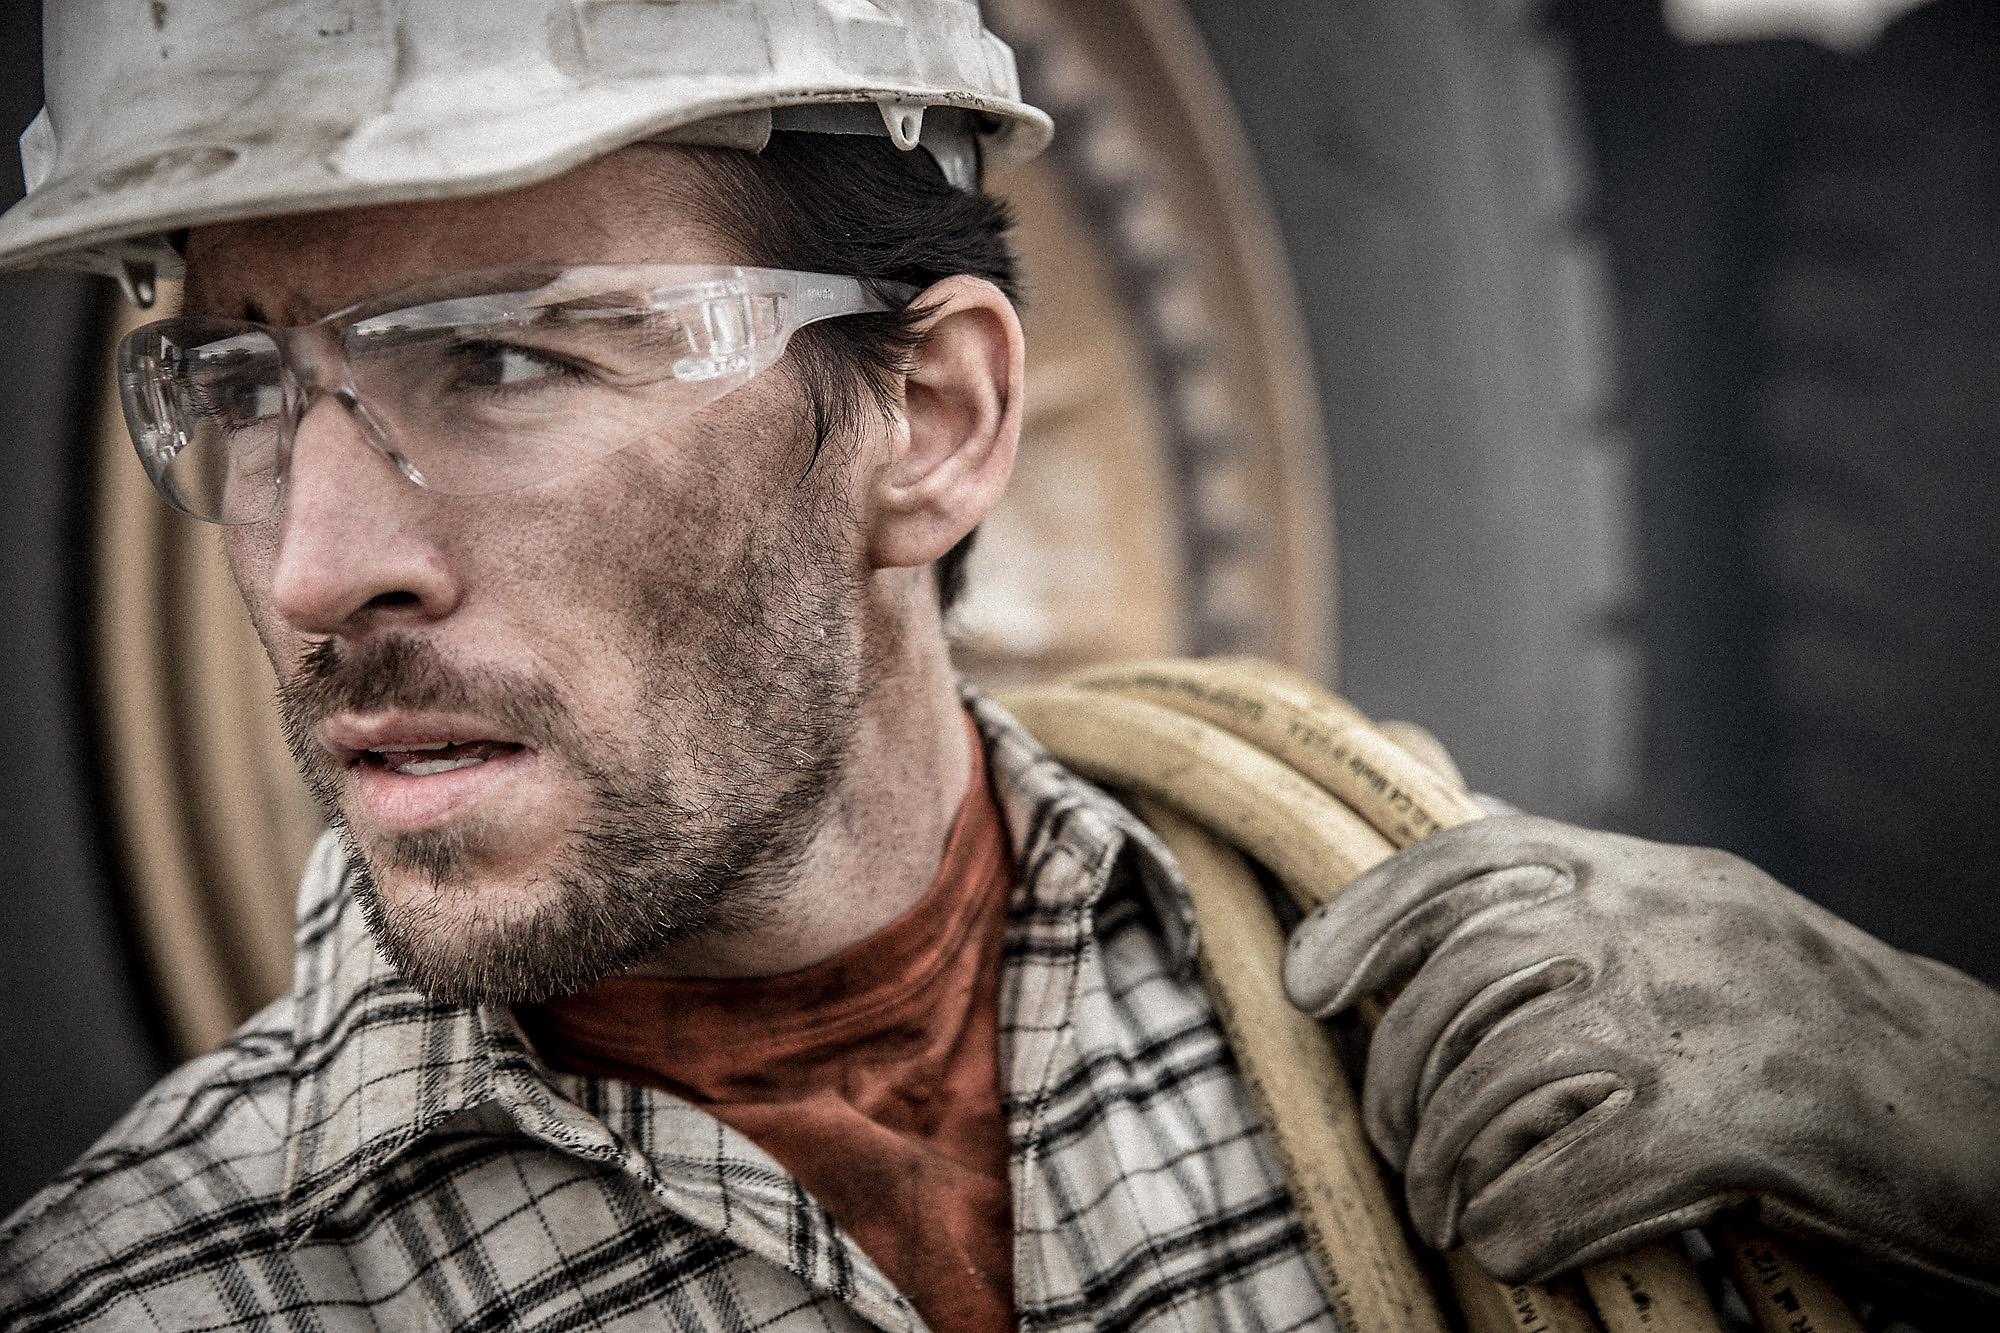 This Professional Photograph of a Modern American Worker in Safety Goggles, Gloves and Hardhat is by a Top Photographer Specializing in Industry Images.